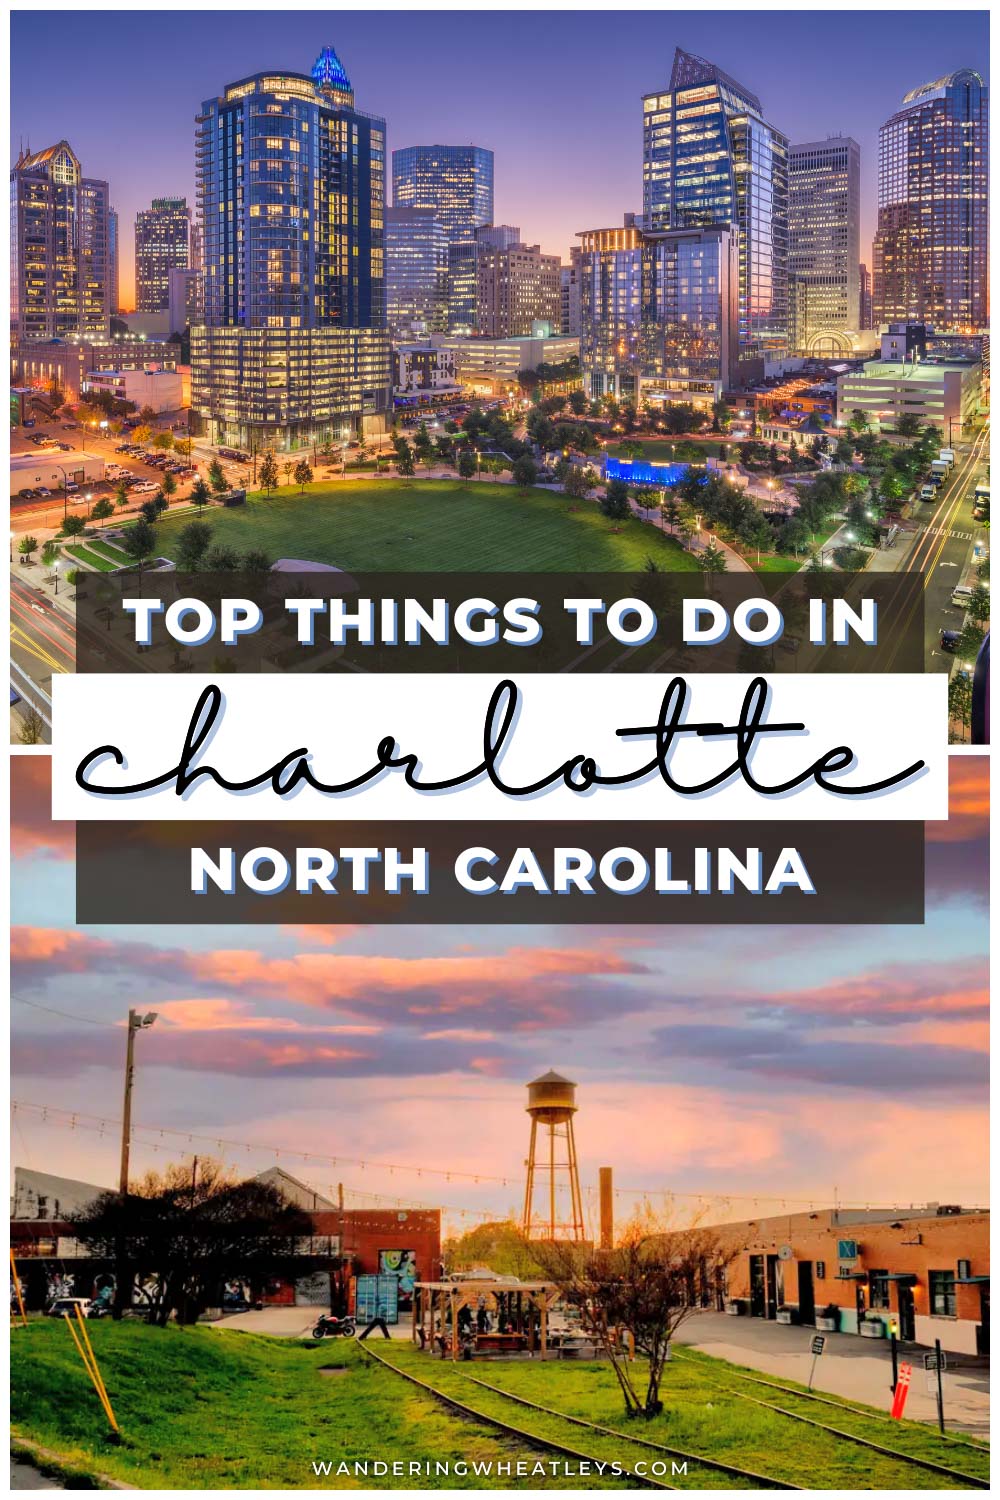 The 15 Best Things To Do In Charlotte